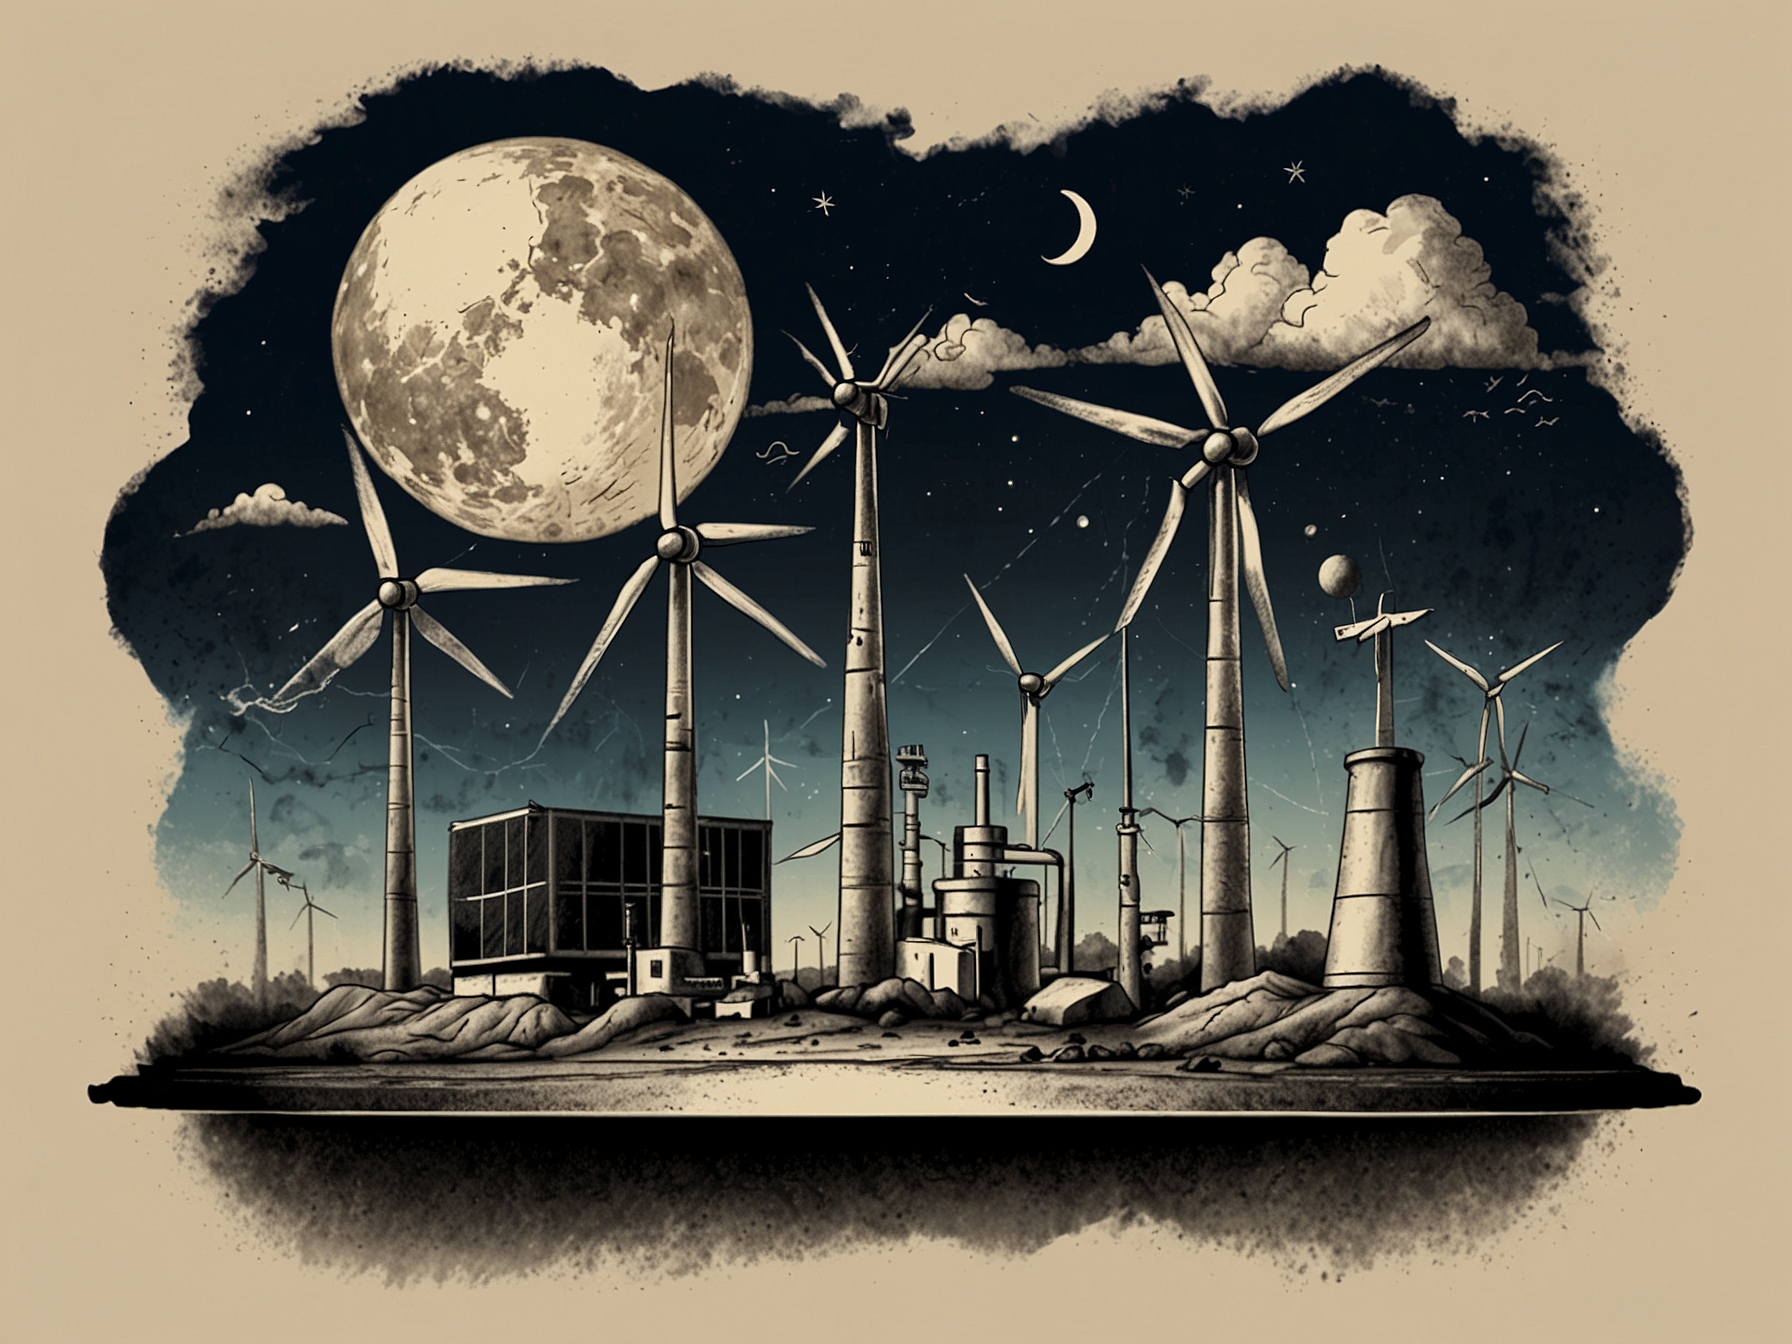 An illustration of the energy transition, showing a balanced scale with fossil fuels on one side and renewable energy sources like wind and solar on the other, representing the need for a gradual shift.